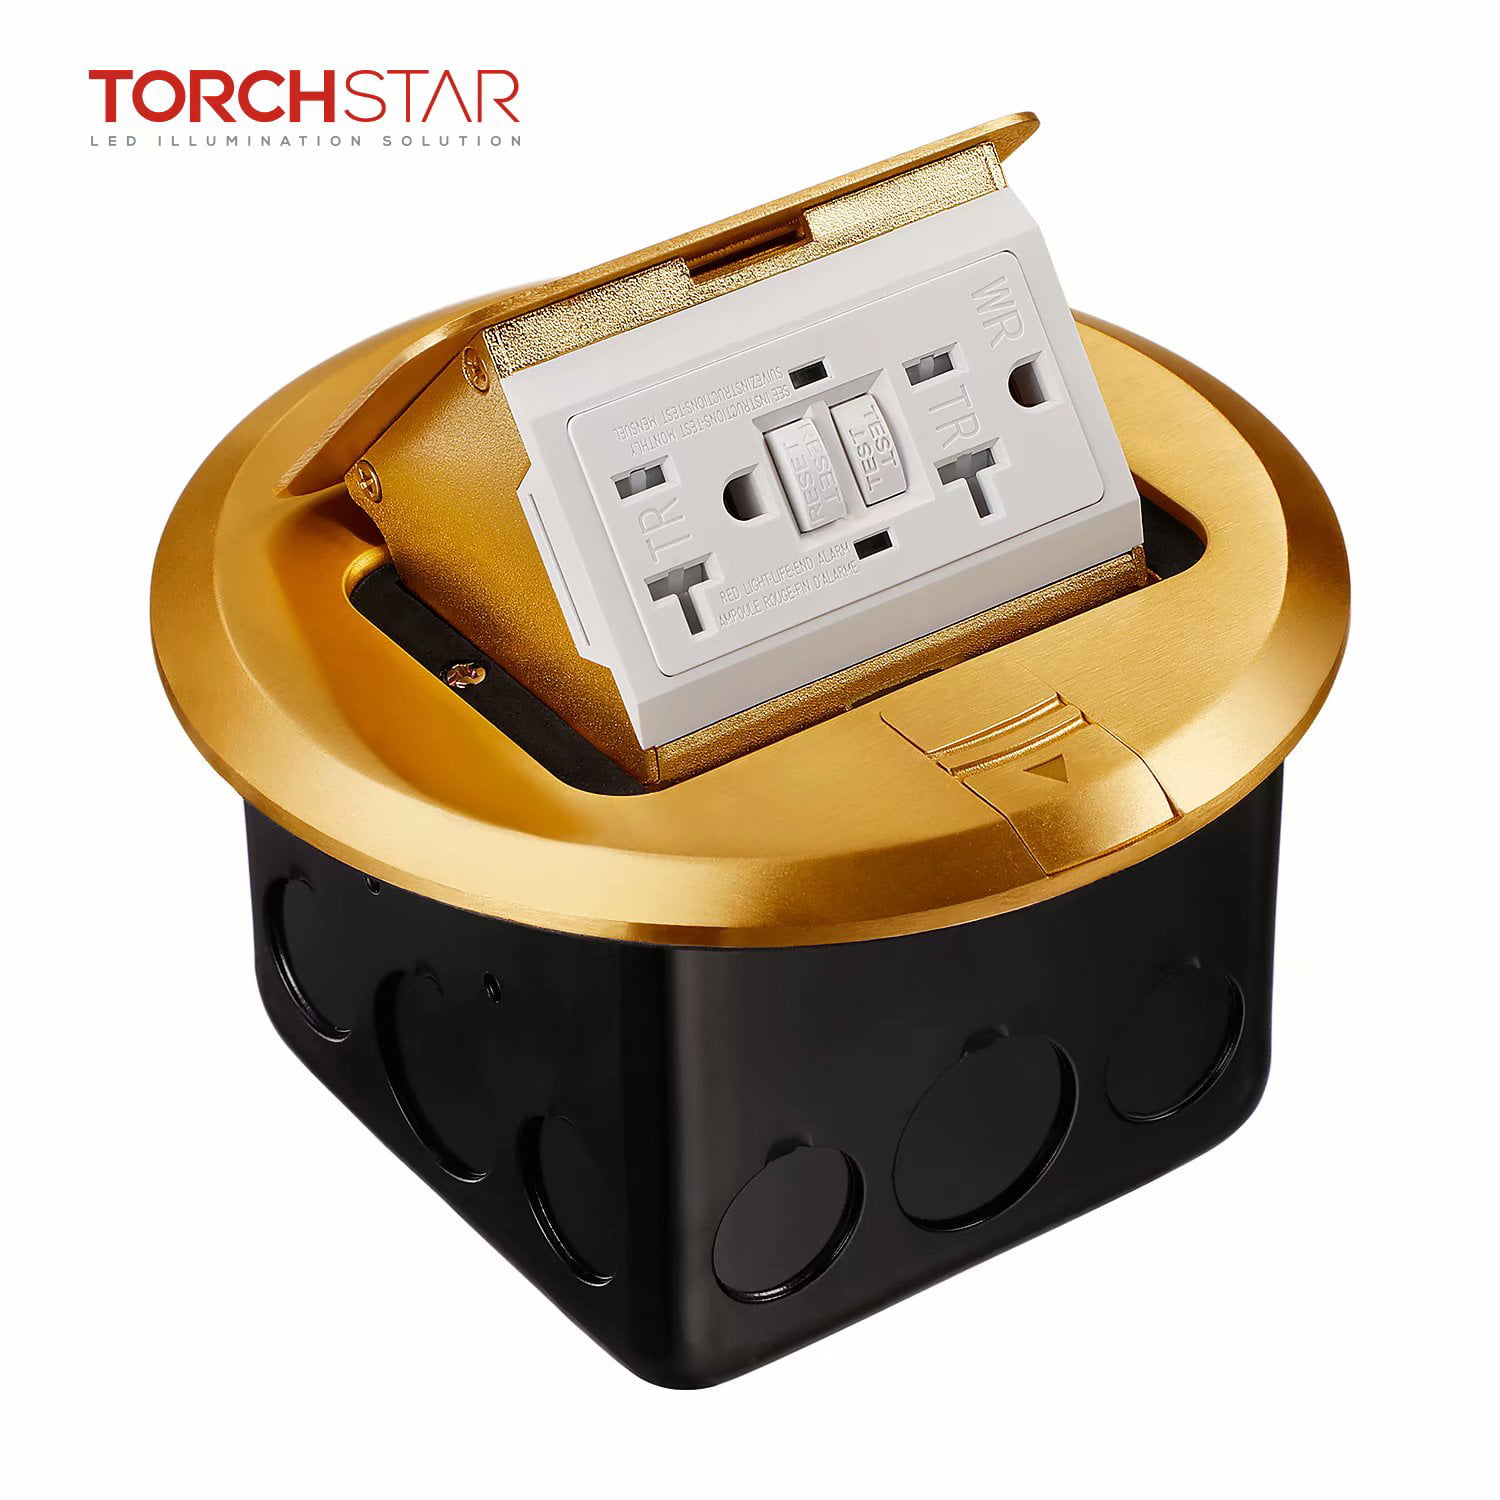 Torchstar Pop Up Electrical Floor Outlet Box Ul Listed Countertop